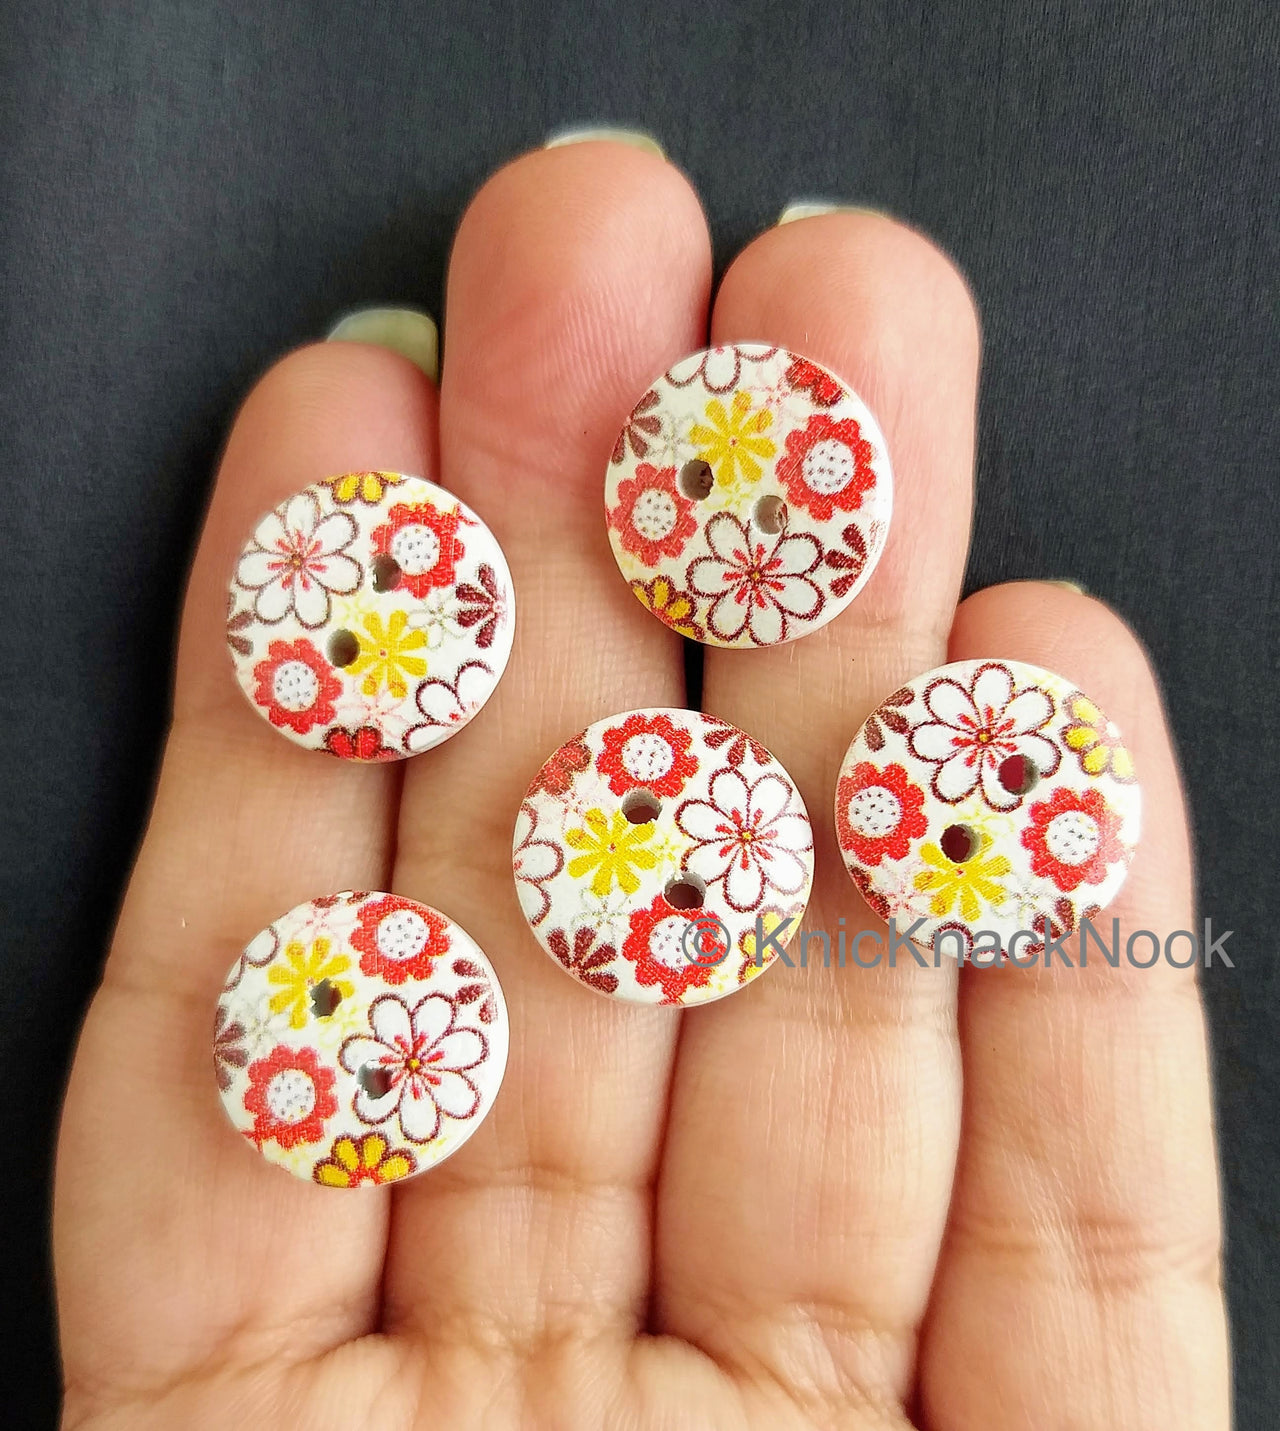 Red And Yellow Floral Print Round Wood Buttons